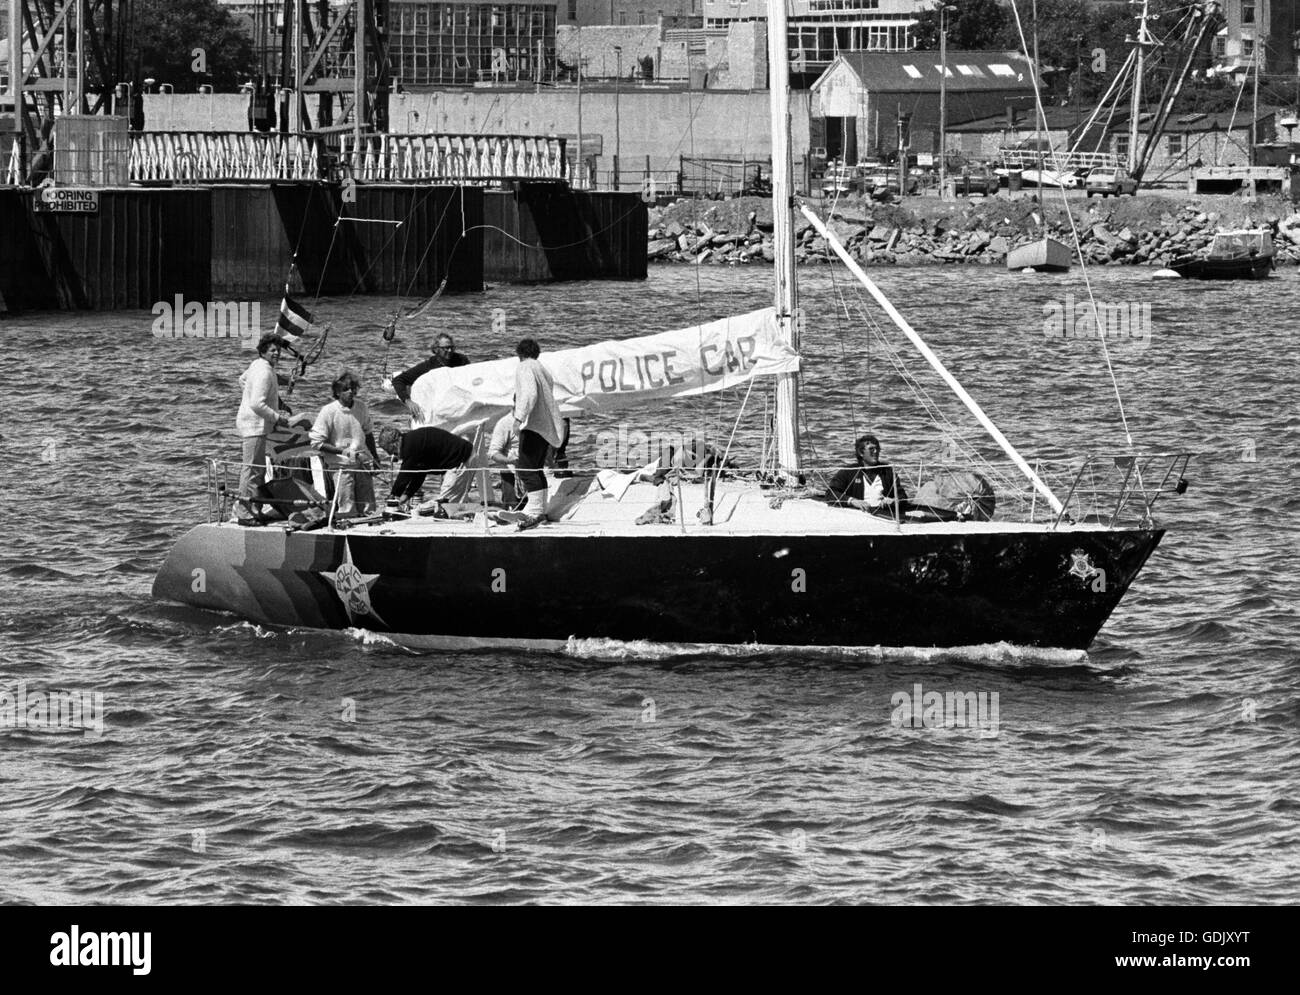 AJAX NEWS PHOTOS. 15TH AUGUST, 1979. PLYMOUTH, ENGLAND. - AUSTRALIAN ADMIRAL'S CUP YACHT POLICE CAR ARRIVES IN PLYMOUTH MILBAY DOCKS TODAY AFTER FINISHING THE WORST EVER 605 MILE OCEAN RACE IN THE HISTORY OF THE FASTNET.  PHOTO:JONATHAN EASTLAND/AJAX REF: HDD/WPX/FASTNET 79 791608 Stock Photo